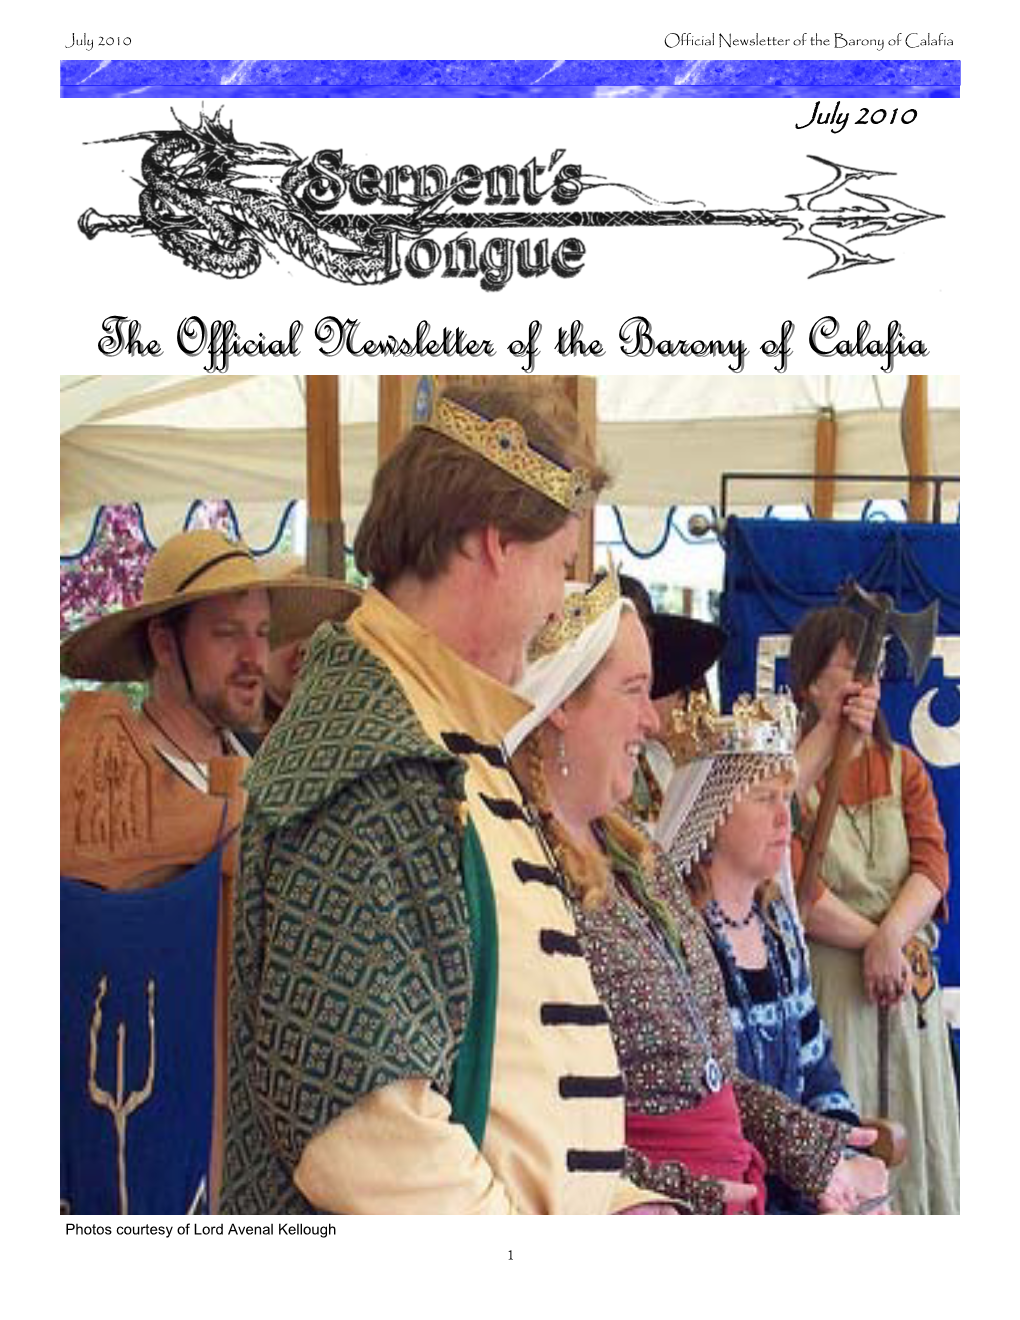 The Official Newsletter of the Barony of Calafia